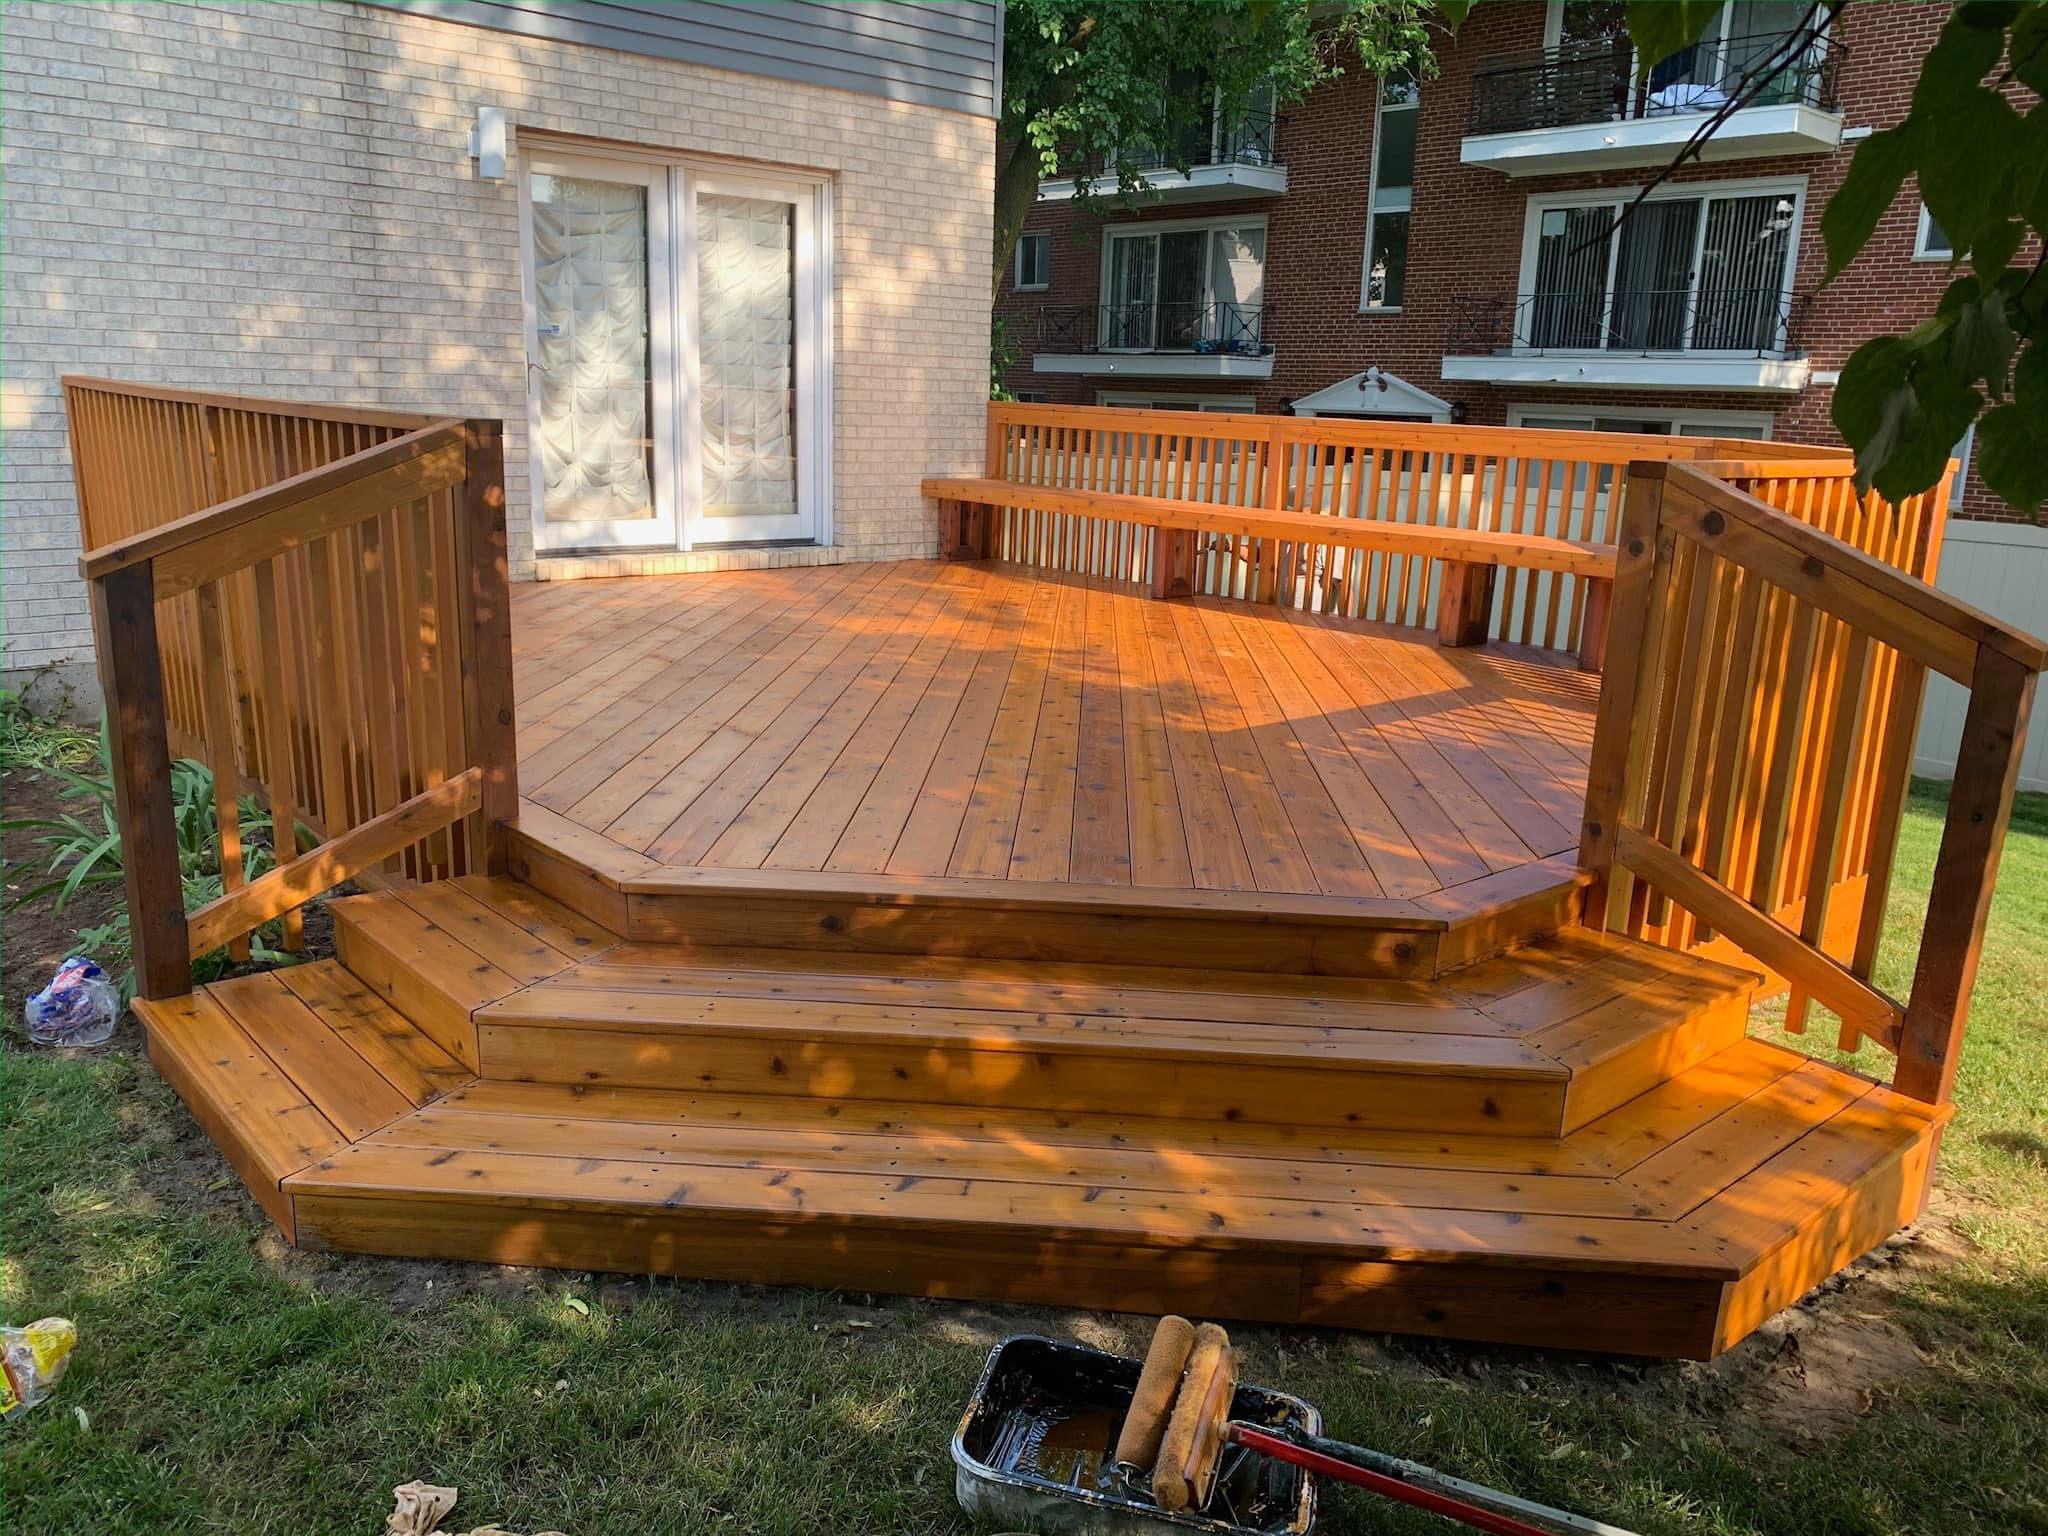 High End Pressure Washing and Deck Staining In Arlington Heights, IL